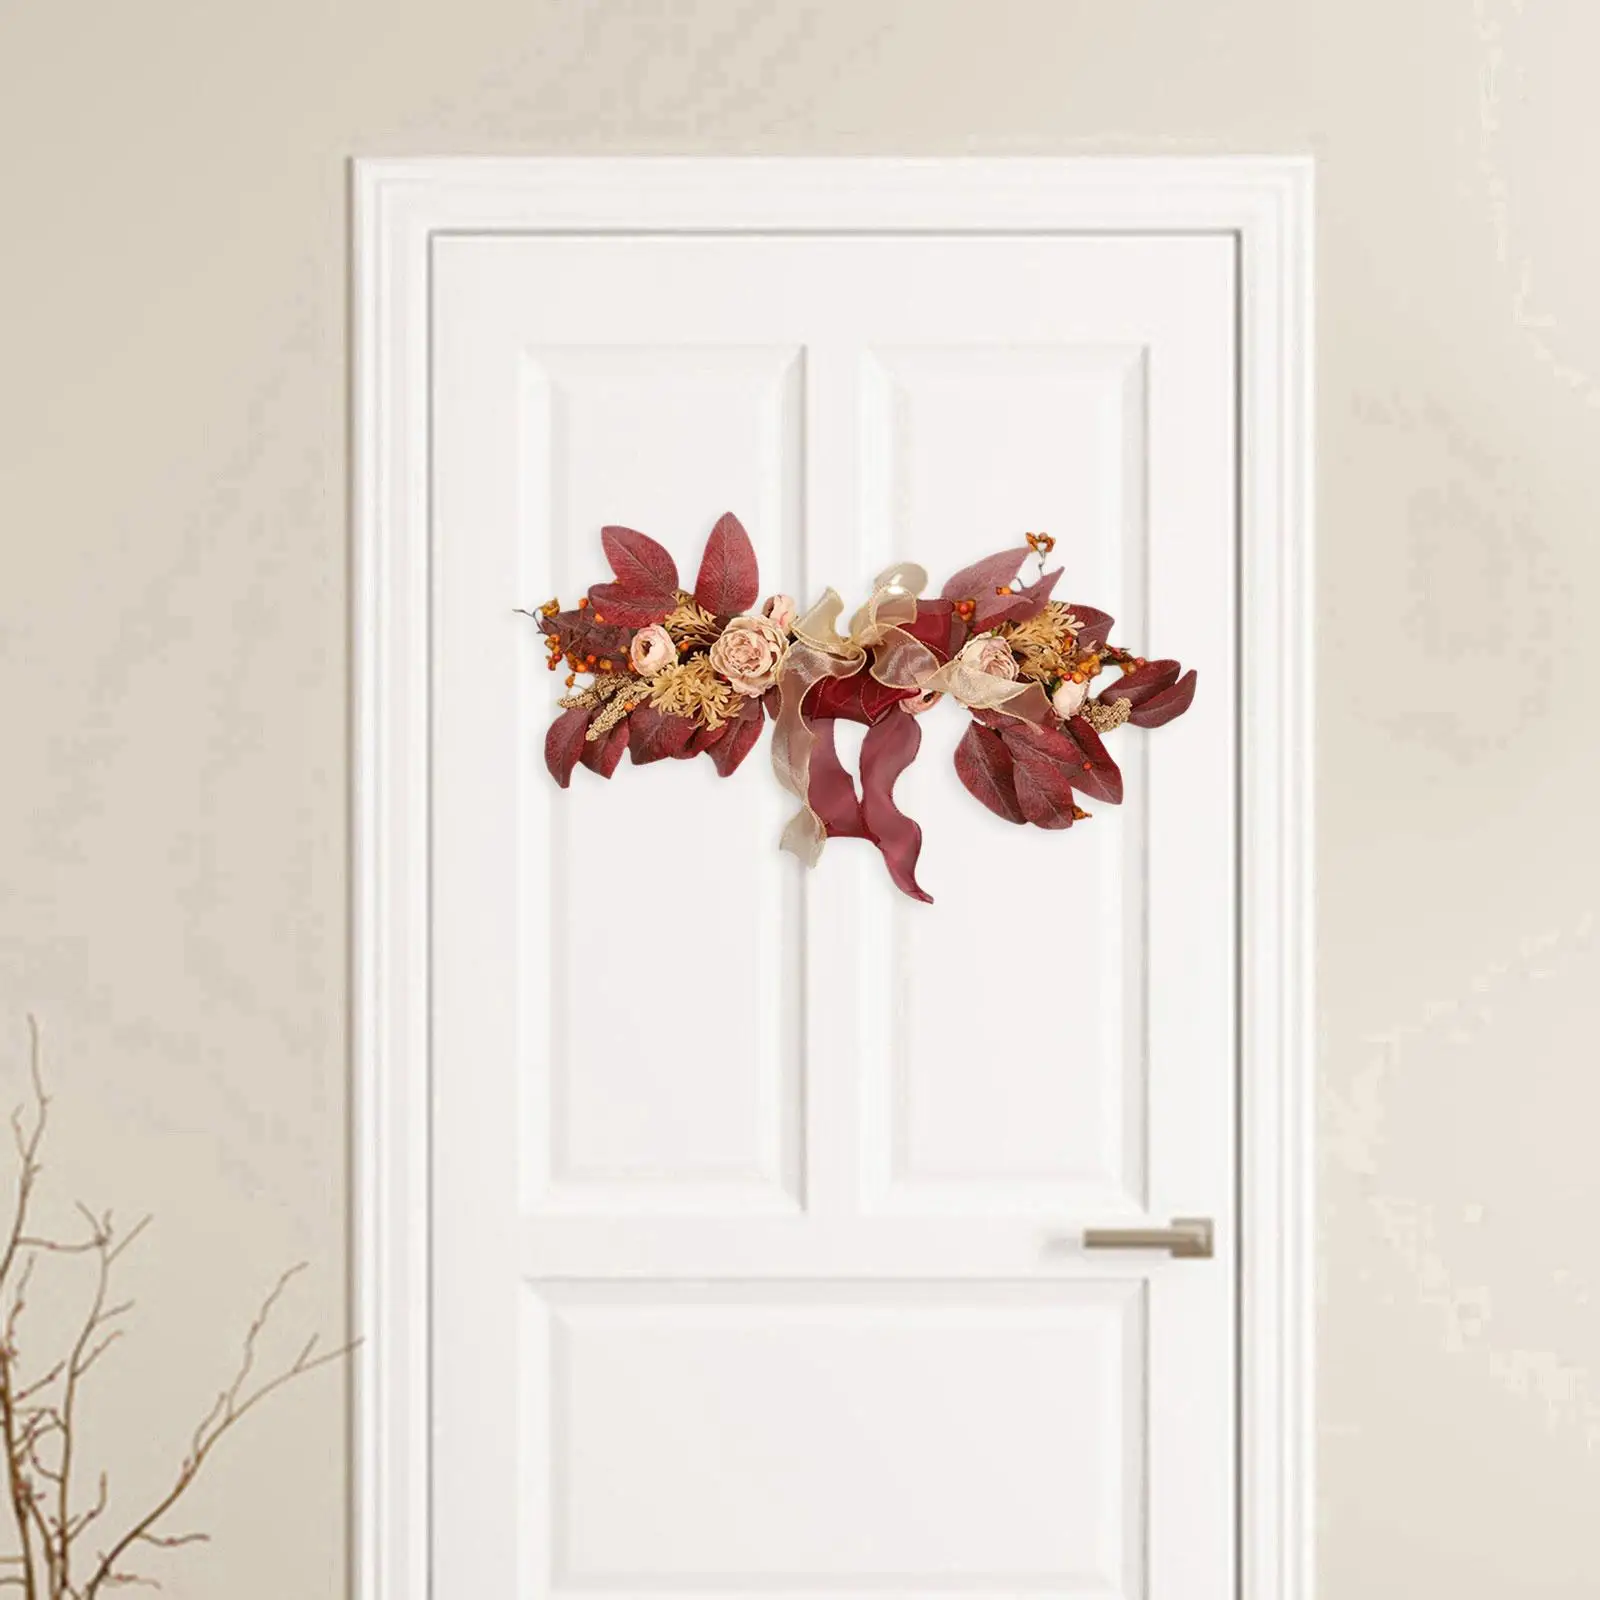 52cm Front Door Simulated Rose Floral Swag Wreath Home Decoration Romantic Multifunctional Rustic for Dining Room